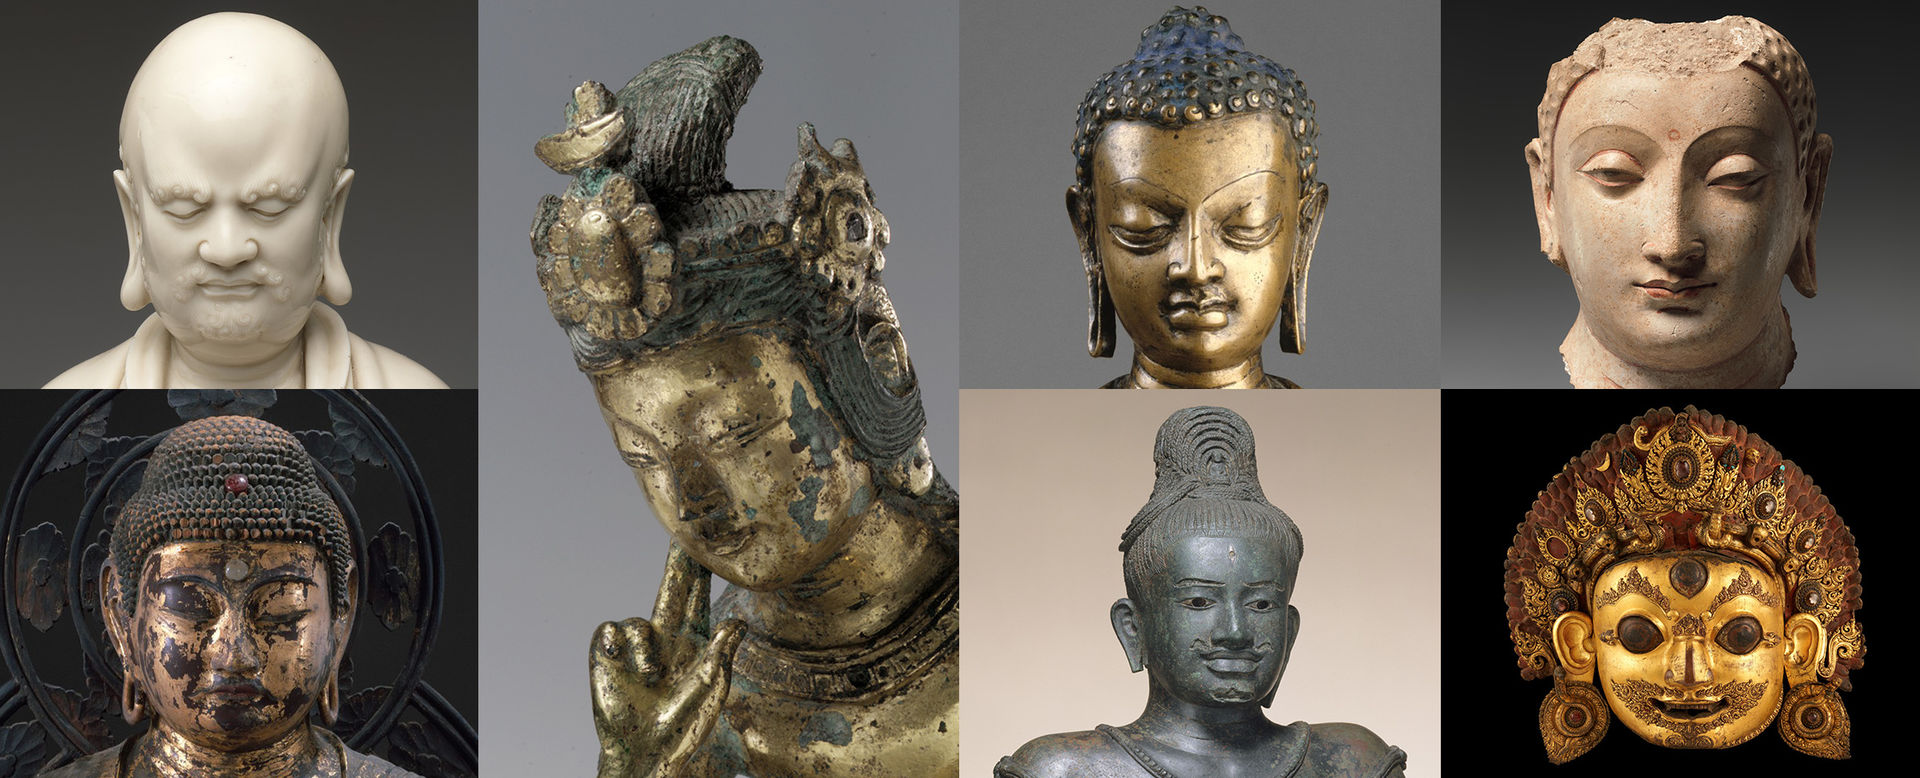 A composite image of Buddha sculptures from six cultural regions